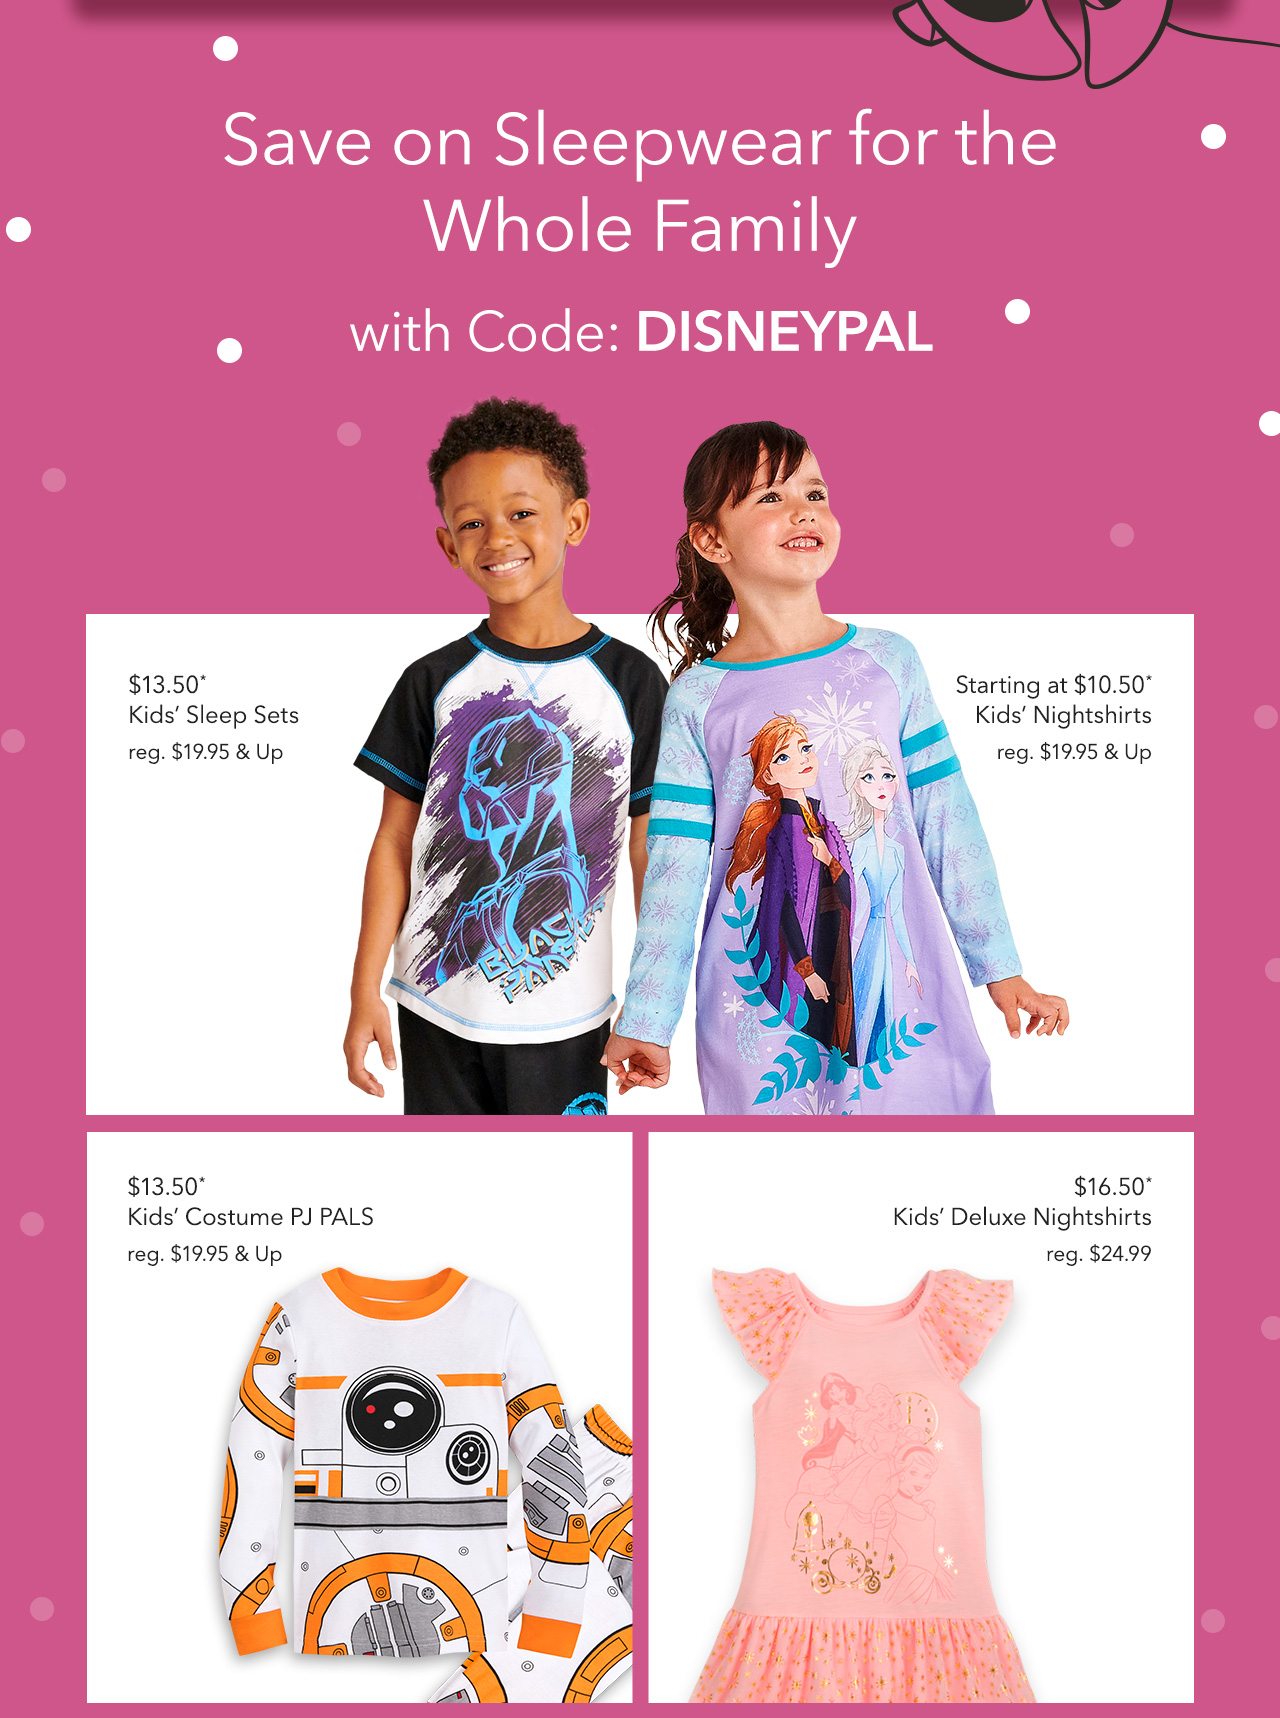 Save on Sleepwear for the Whole Family with Code: DISNEYPAL | Shop Now